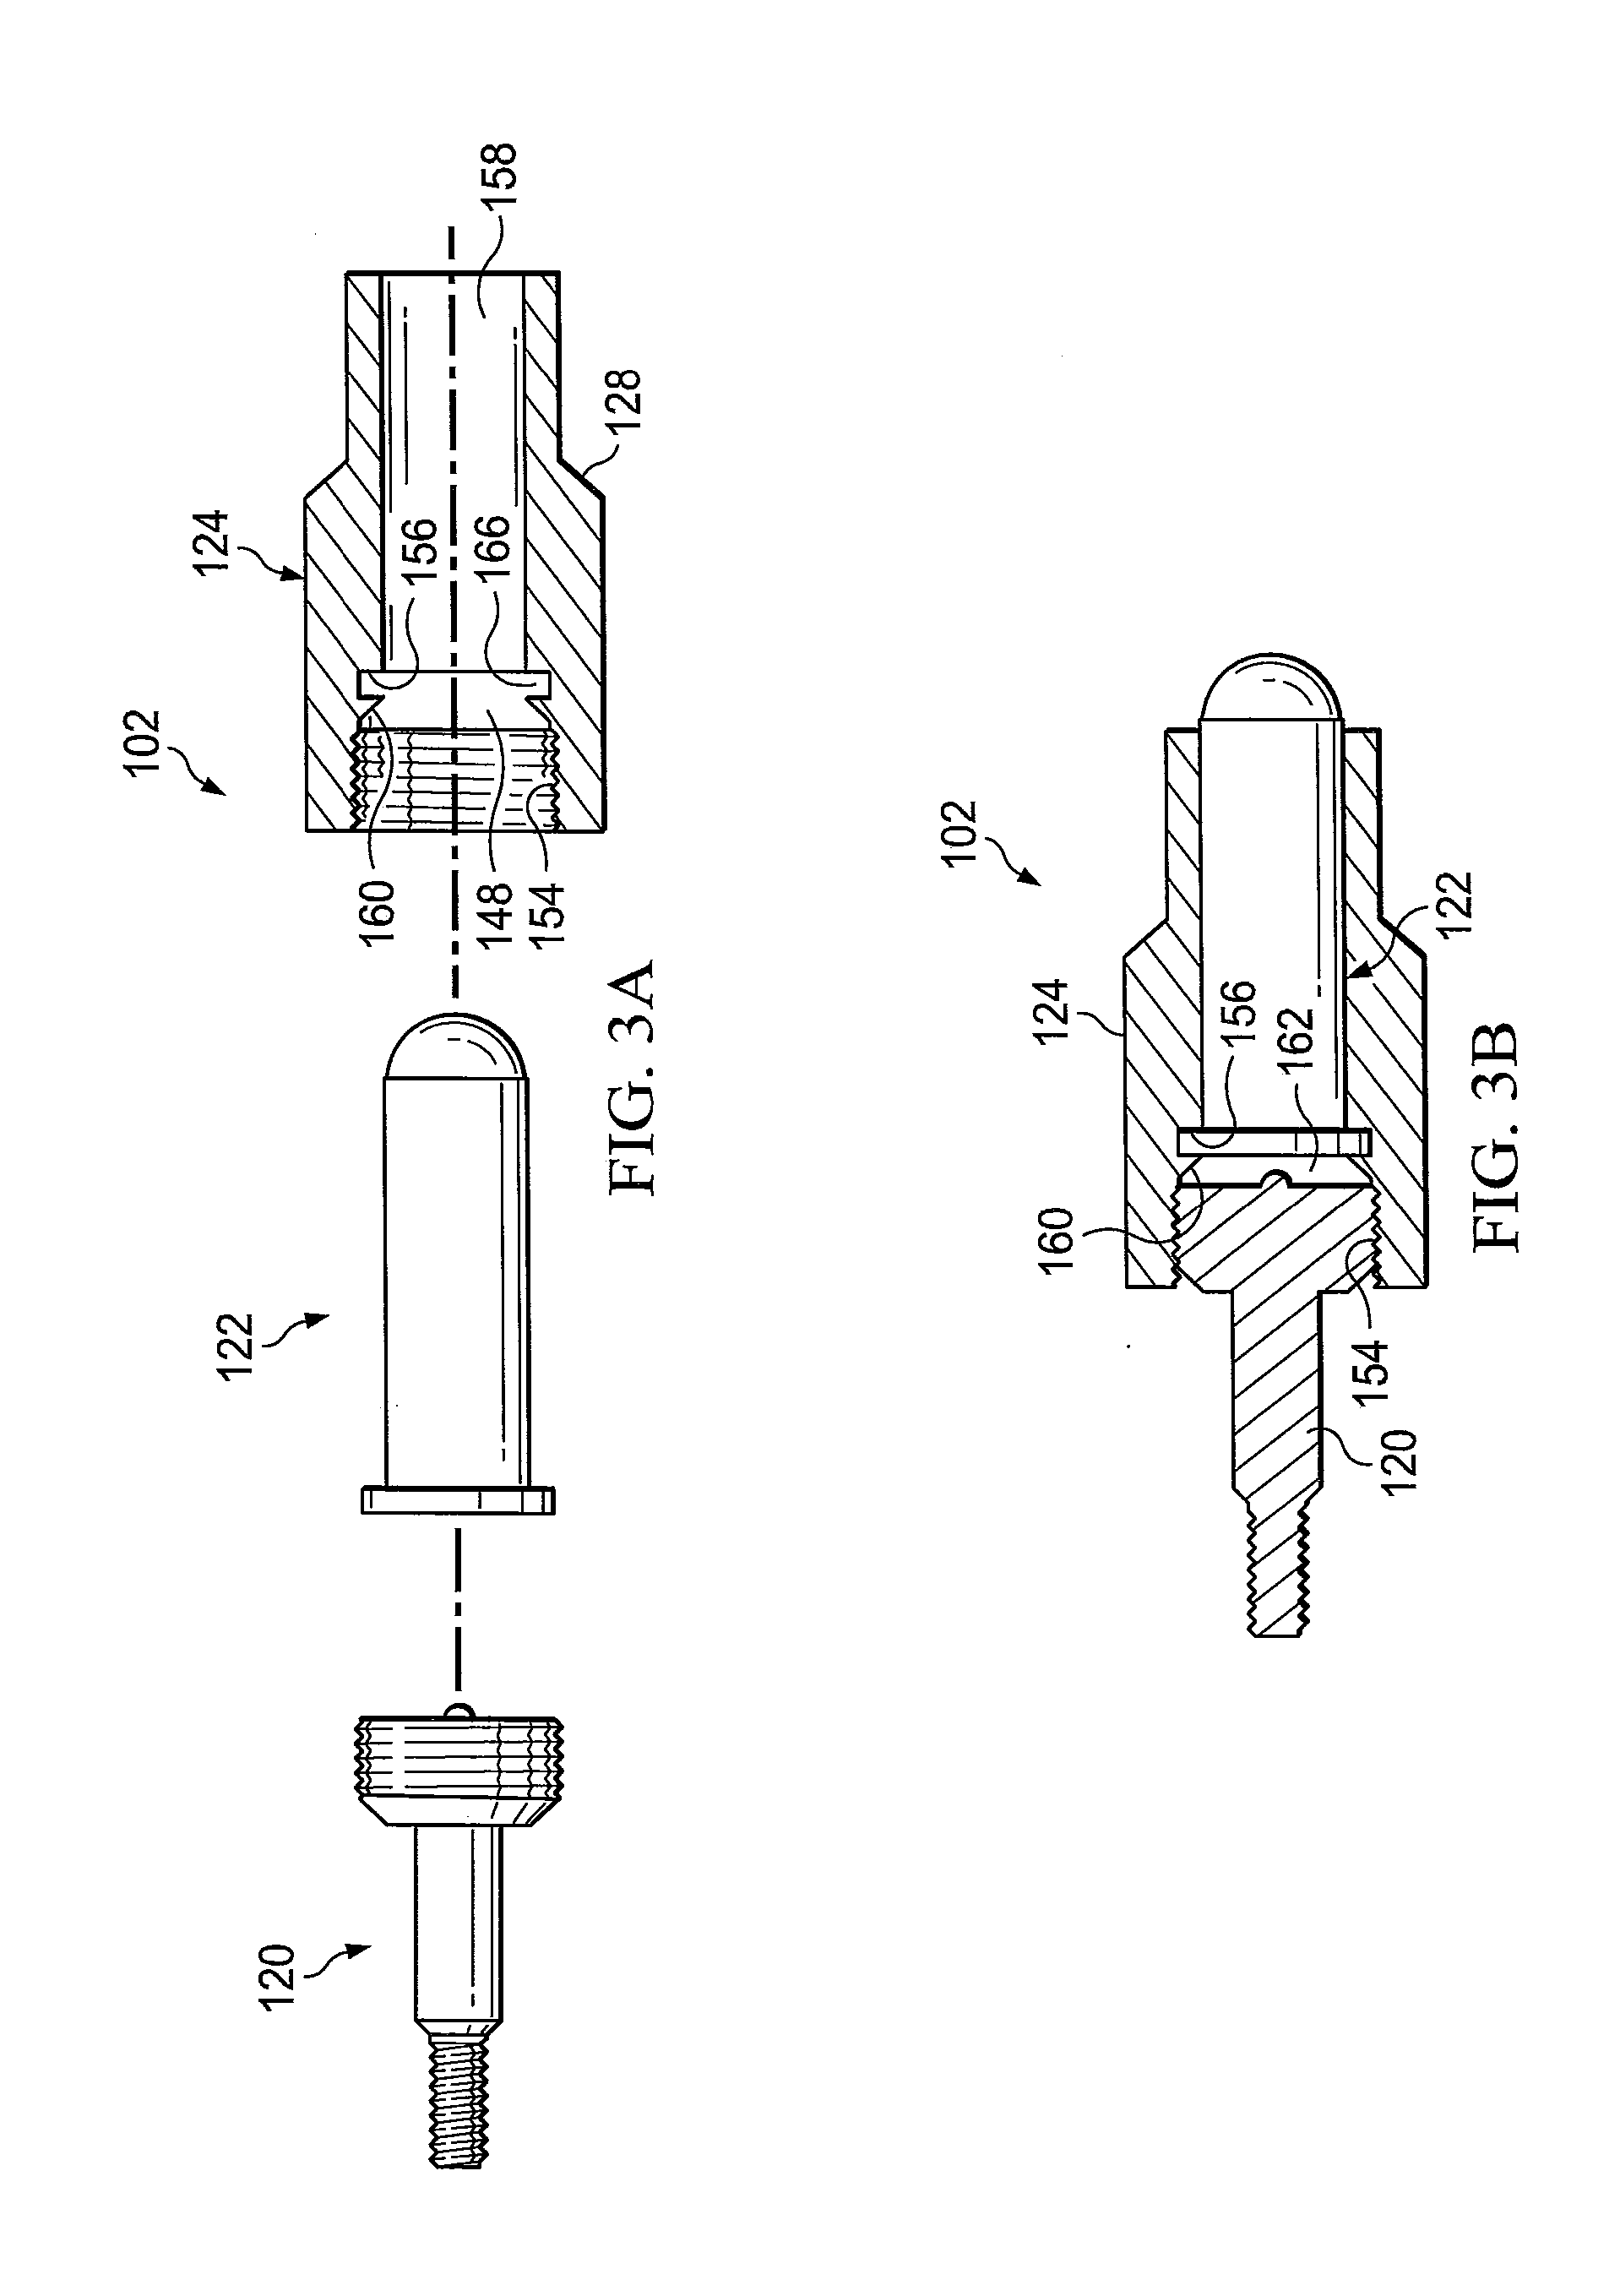 Ammunition delivery system arrowhead and method of use